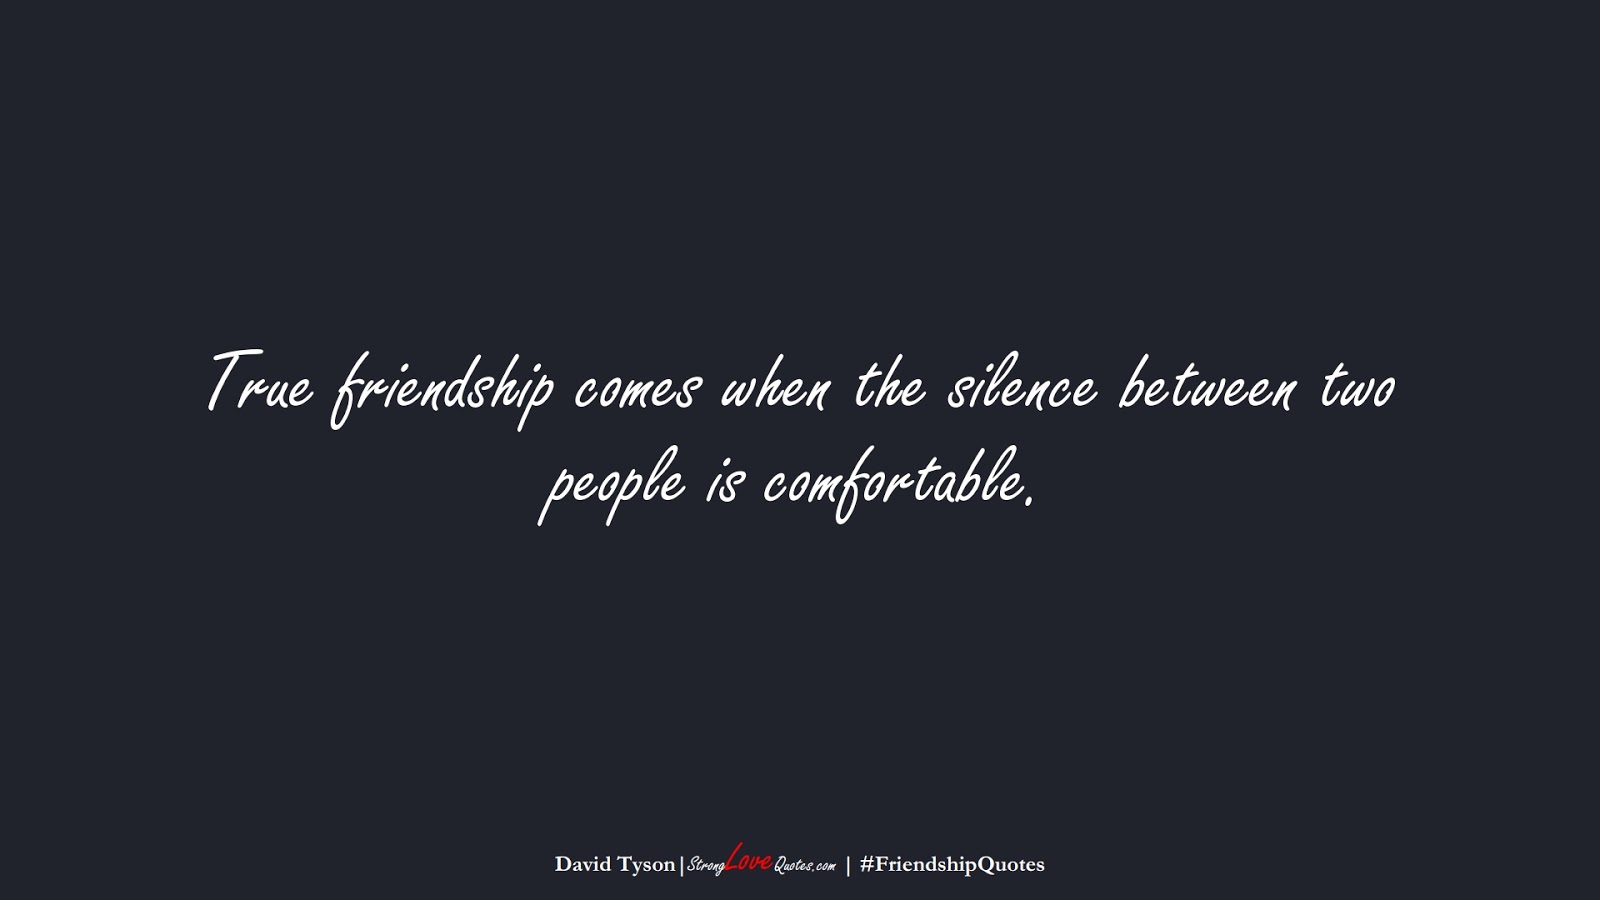 True friendship comes when the silence between two people is comfortable. (David Tyson);  #FriendshipQuotes